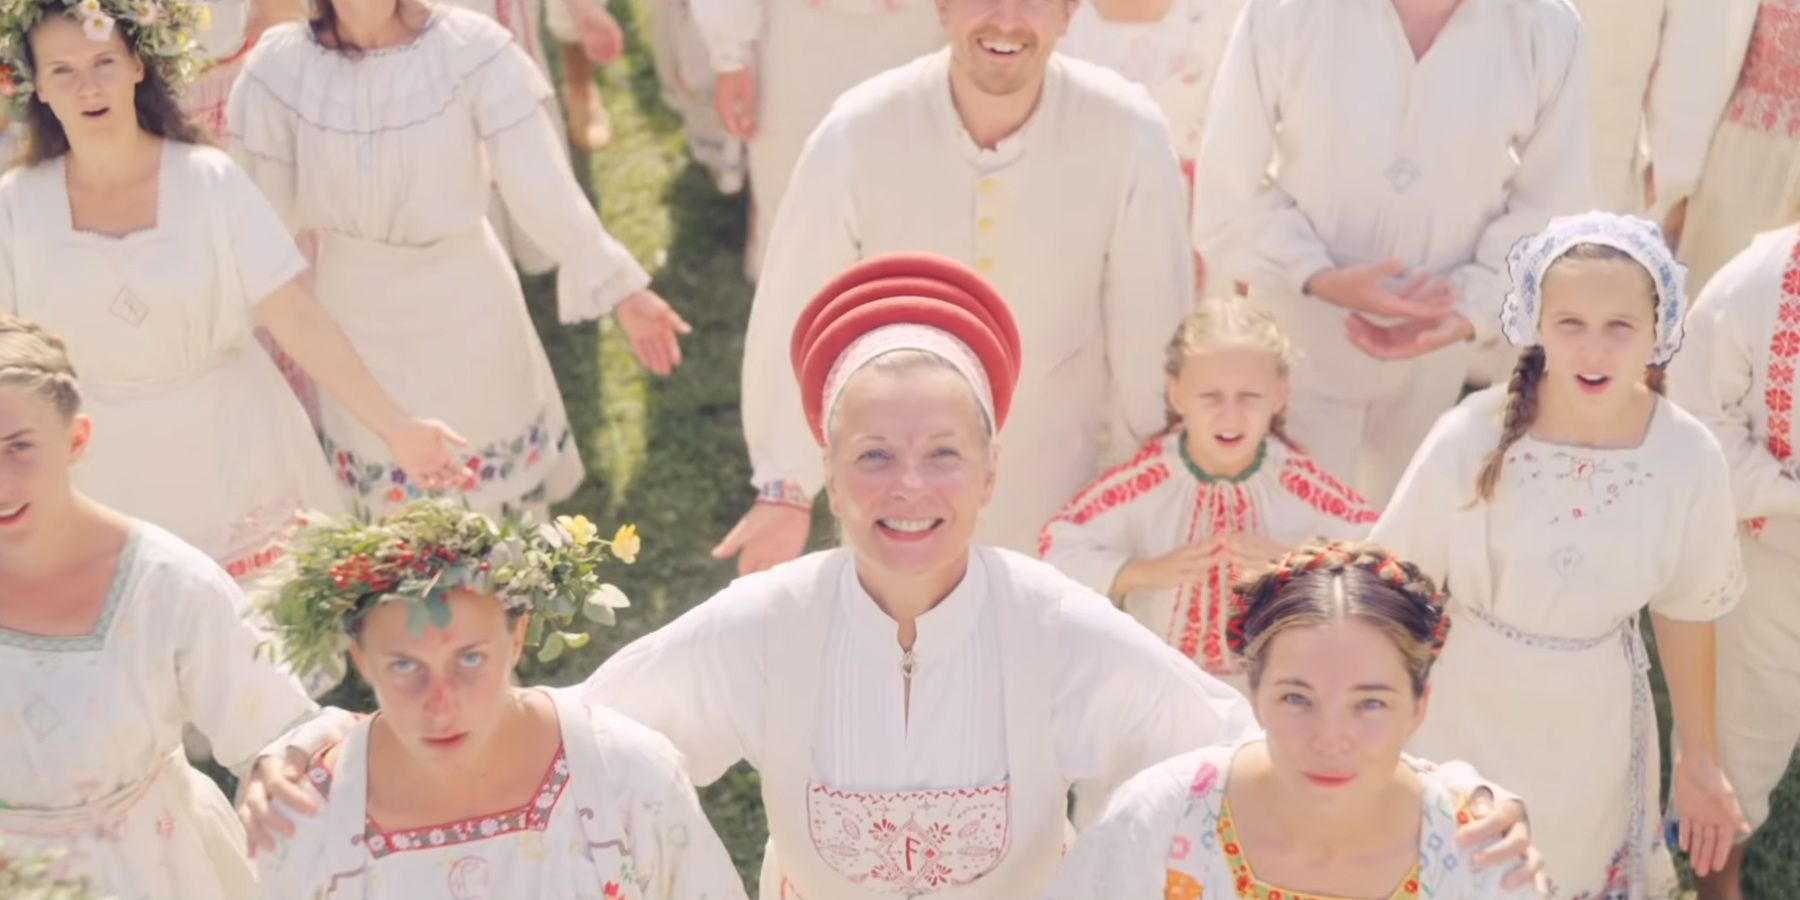 Harga cult welcomes visitors in Midsommar Movie